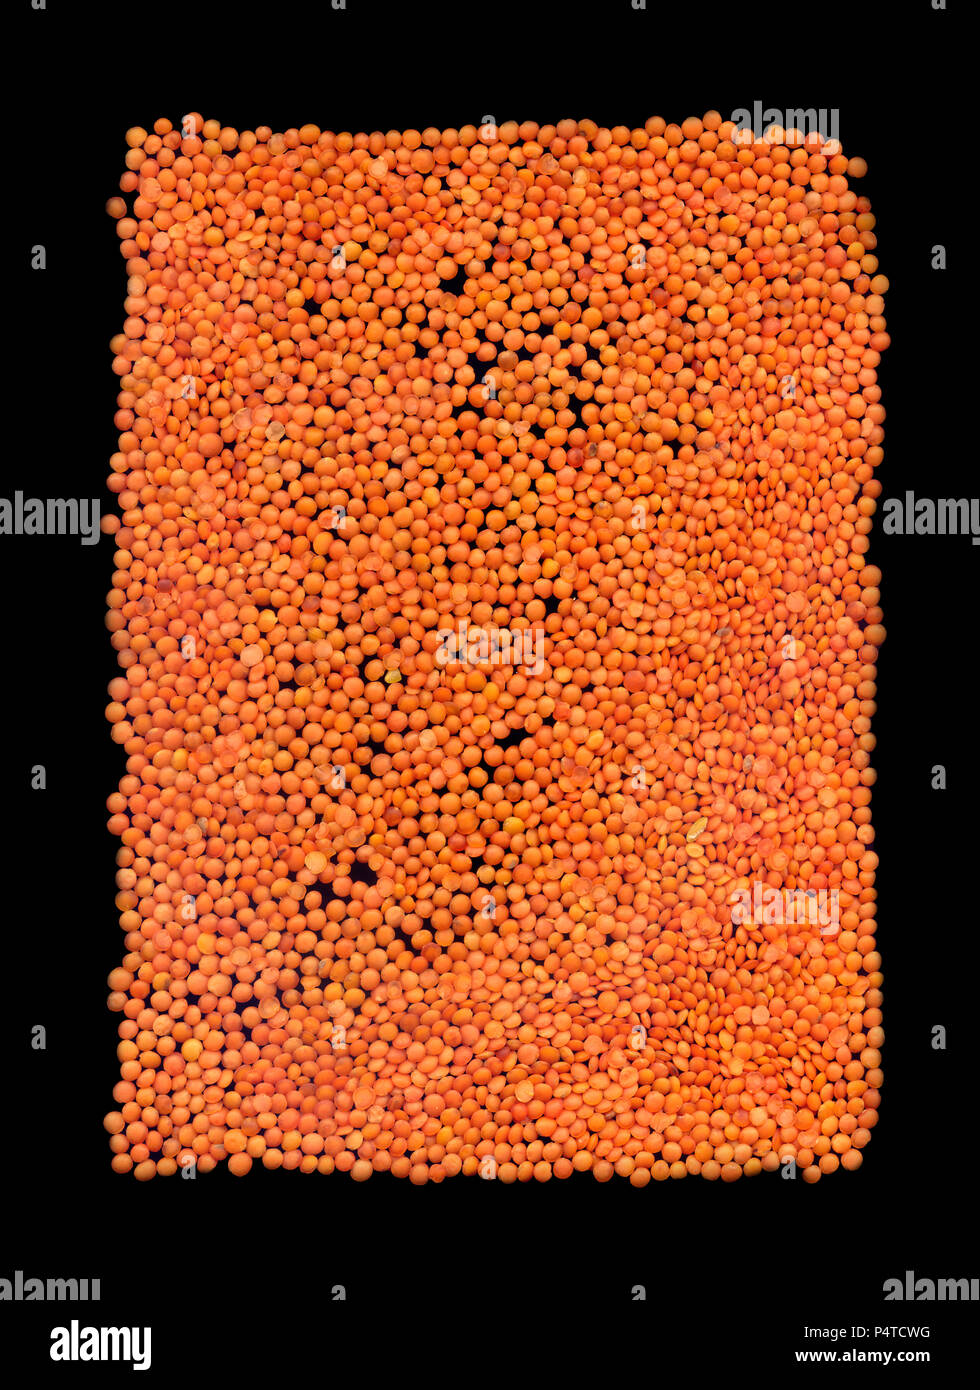 Background of lentil red fruits on a black background Stock Photo